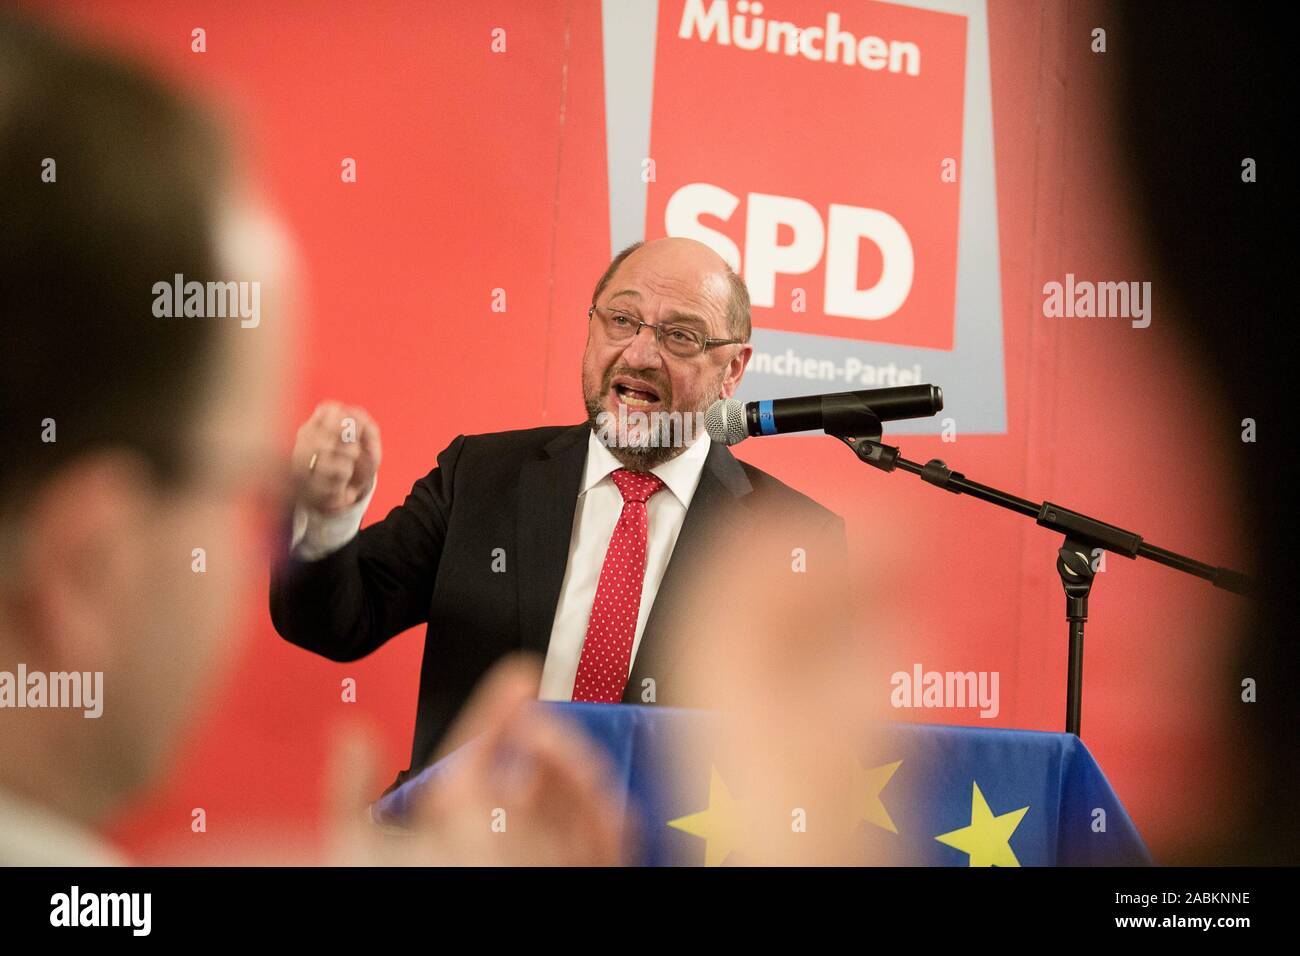 Martin Schulz (SPD) speaks at the European political event 'Europe is the answer' at the 'Echardinger Einkehr' in Bad-Kreuther-Straße 8 in Munich. [automated translation] Stock Photo